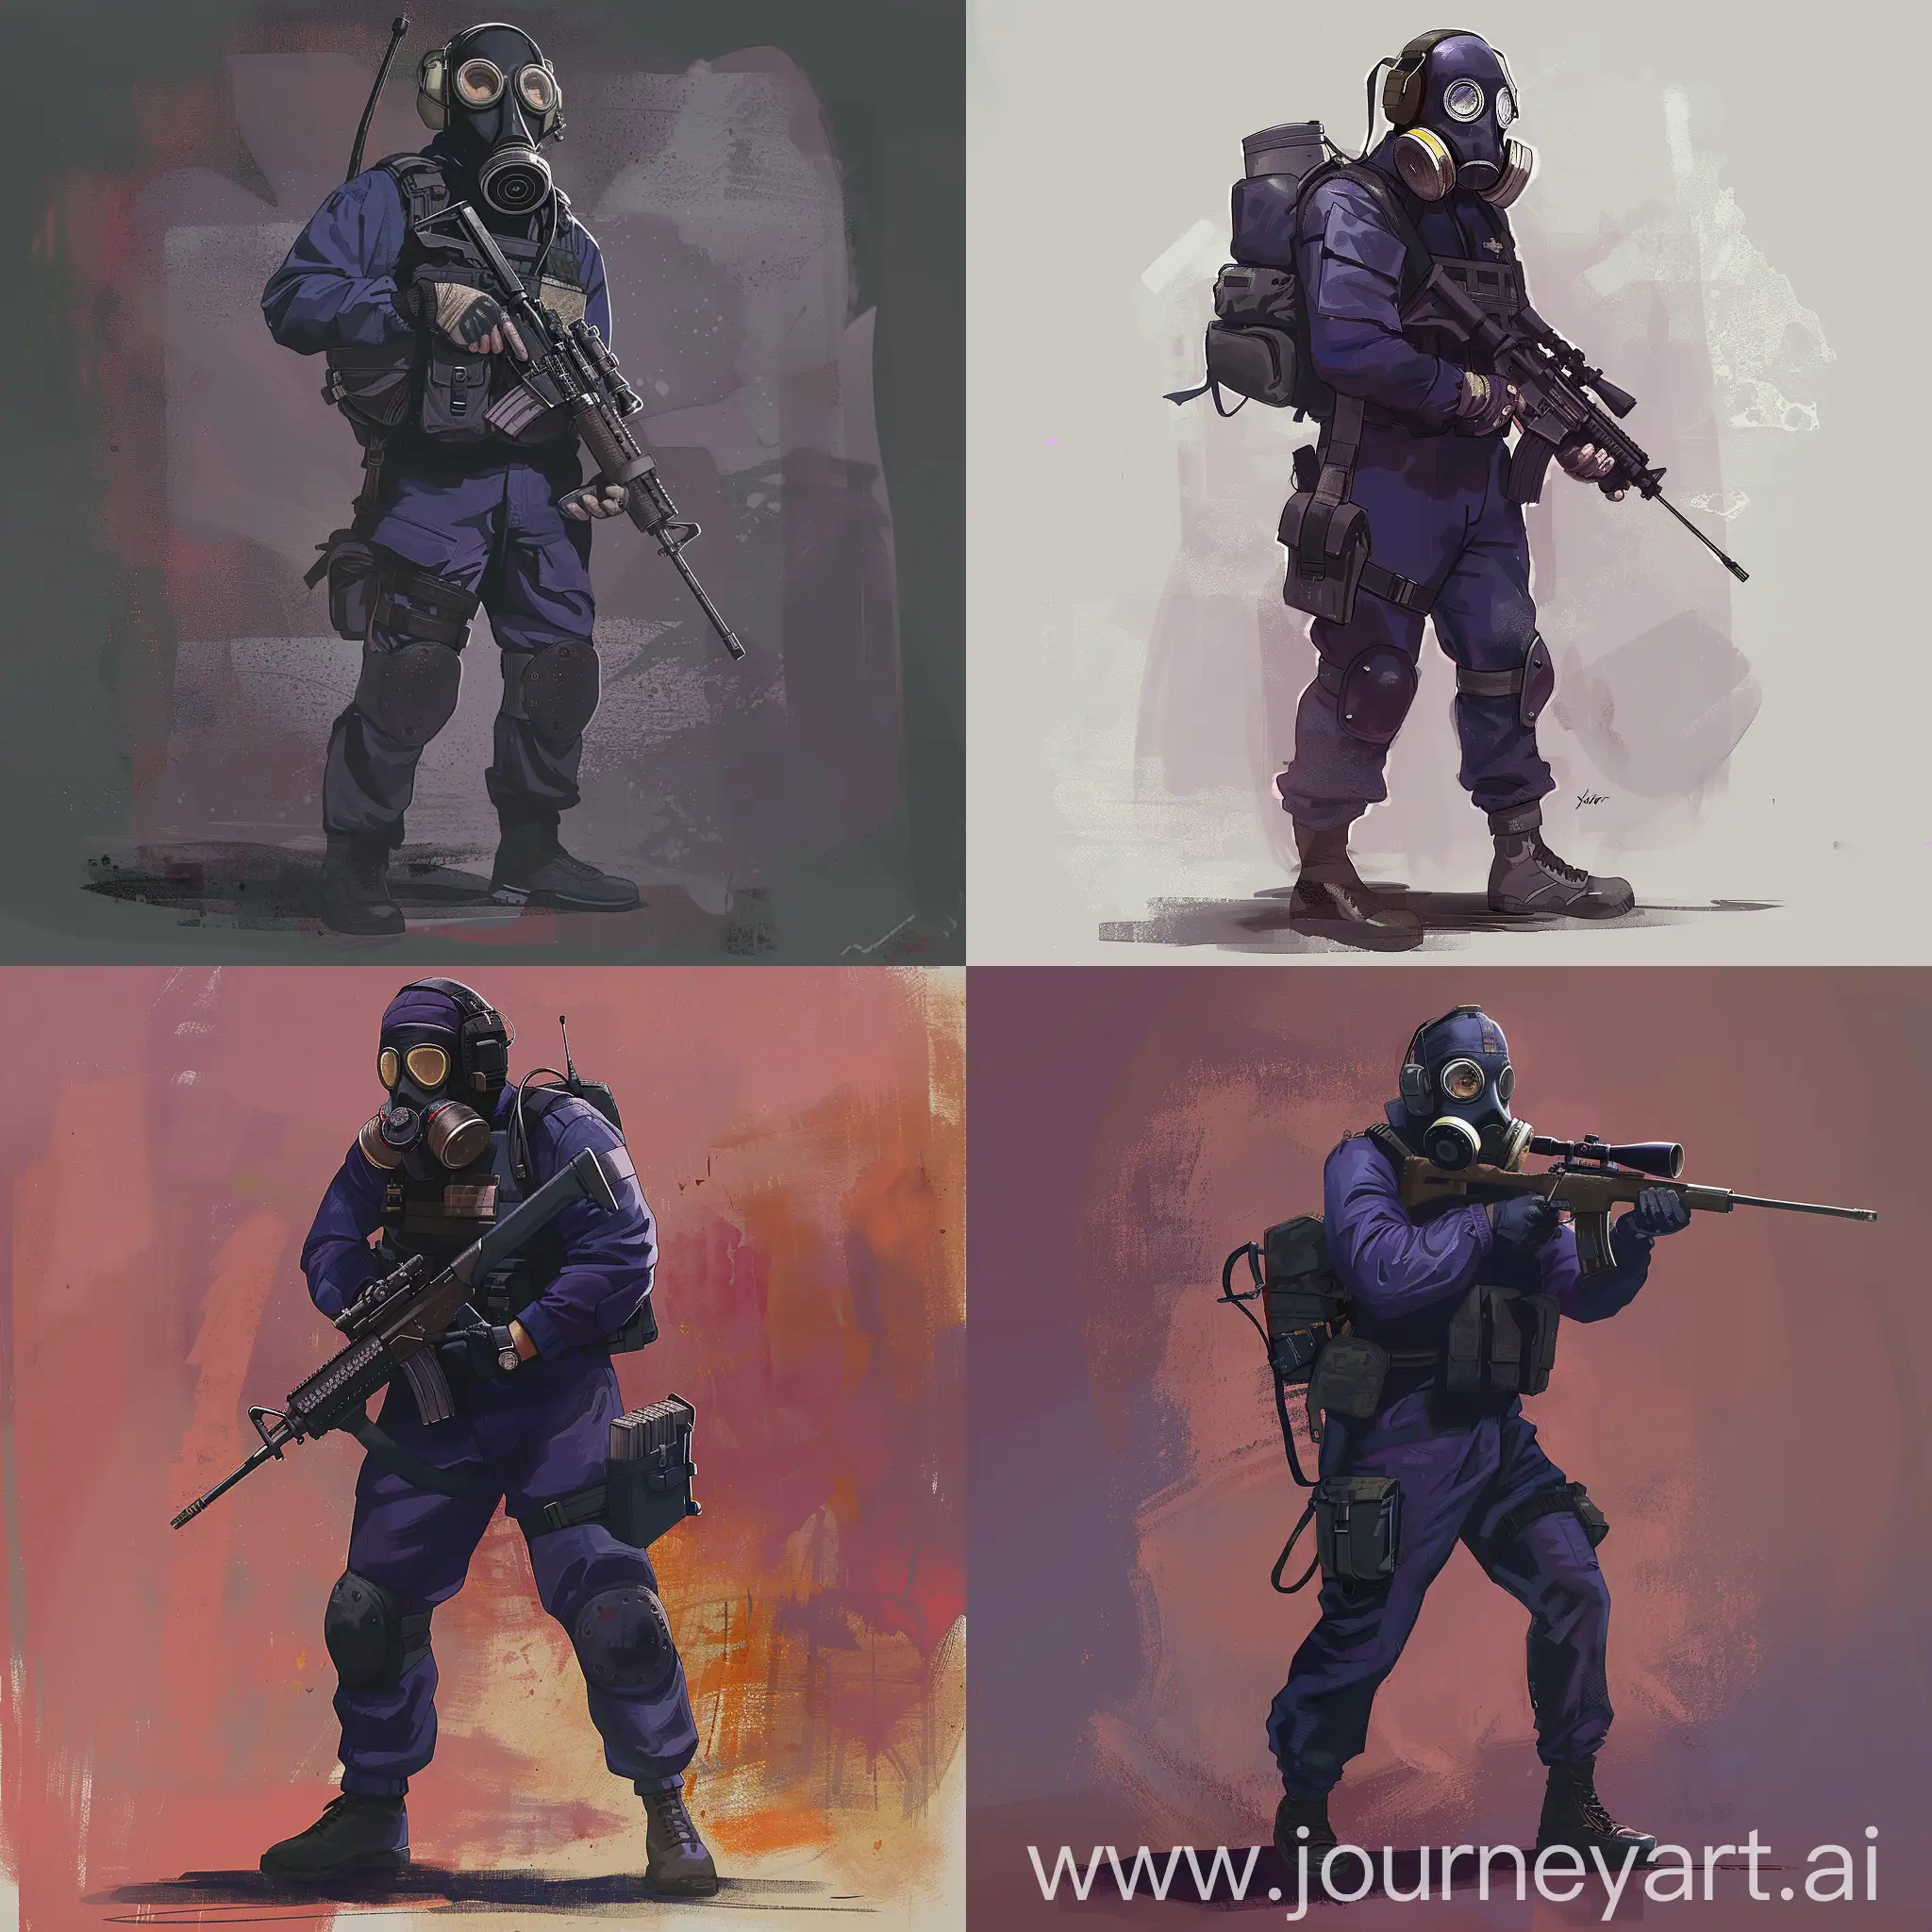 Concept character art, dark purple military jumpsuit, gasmask on his face, small military backpack, military unloading on his body, sniper rifle in his hands.